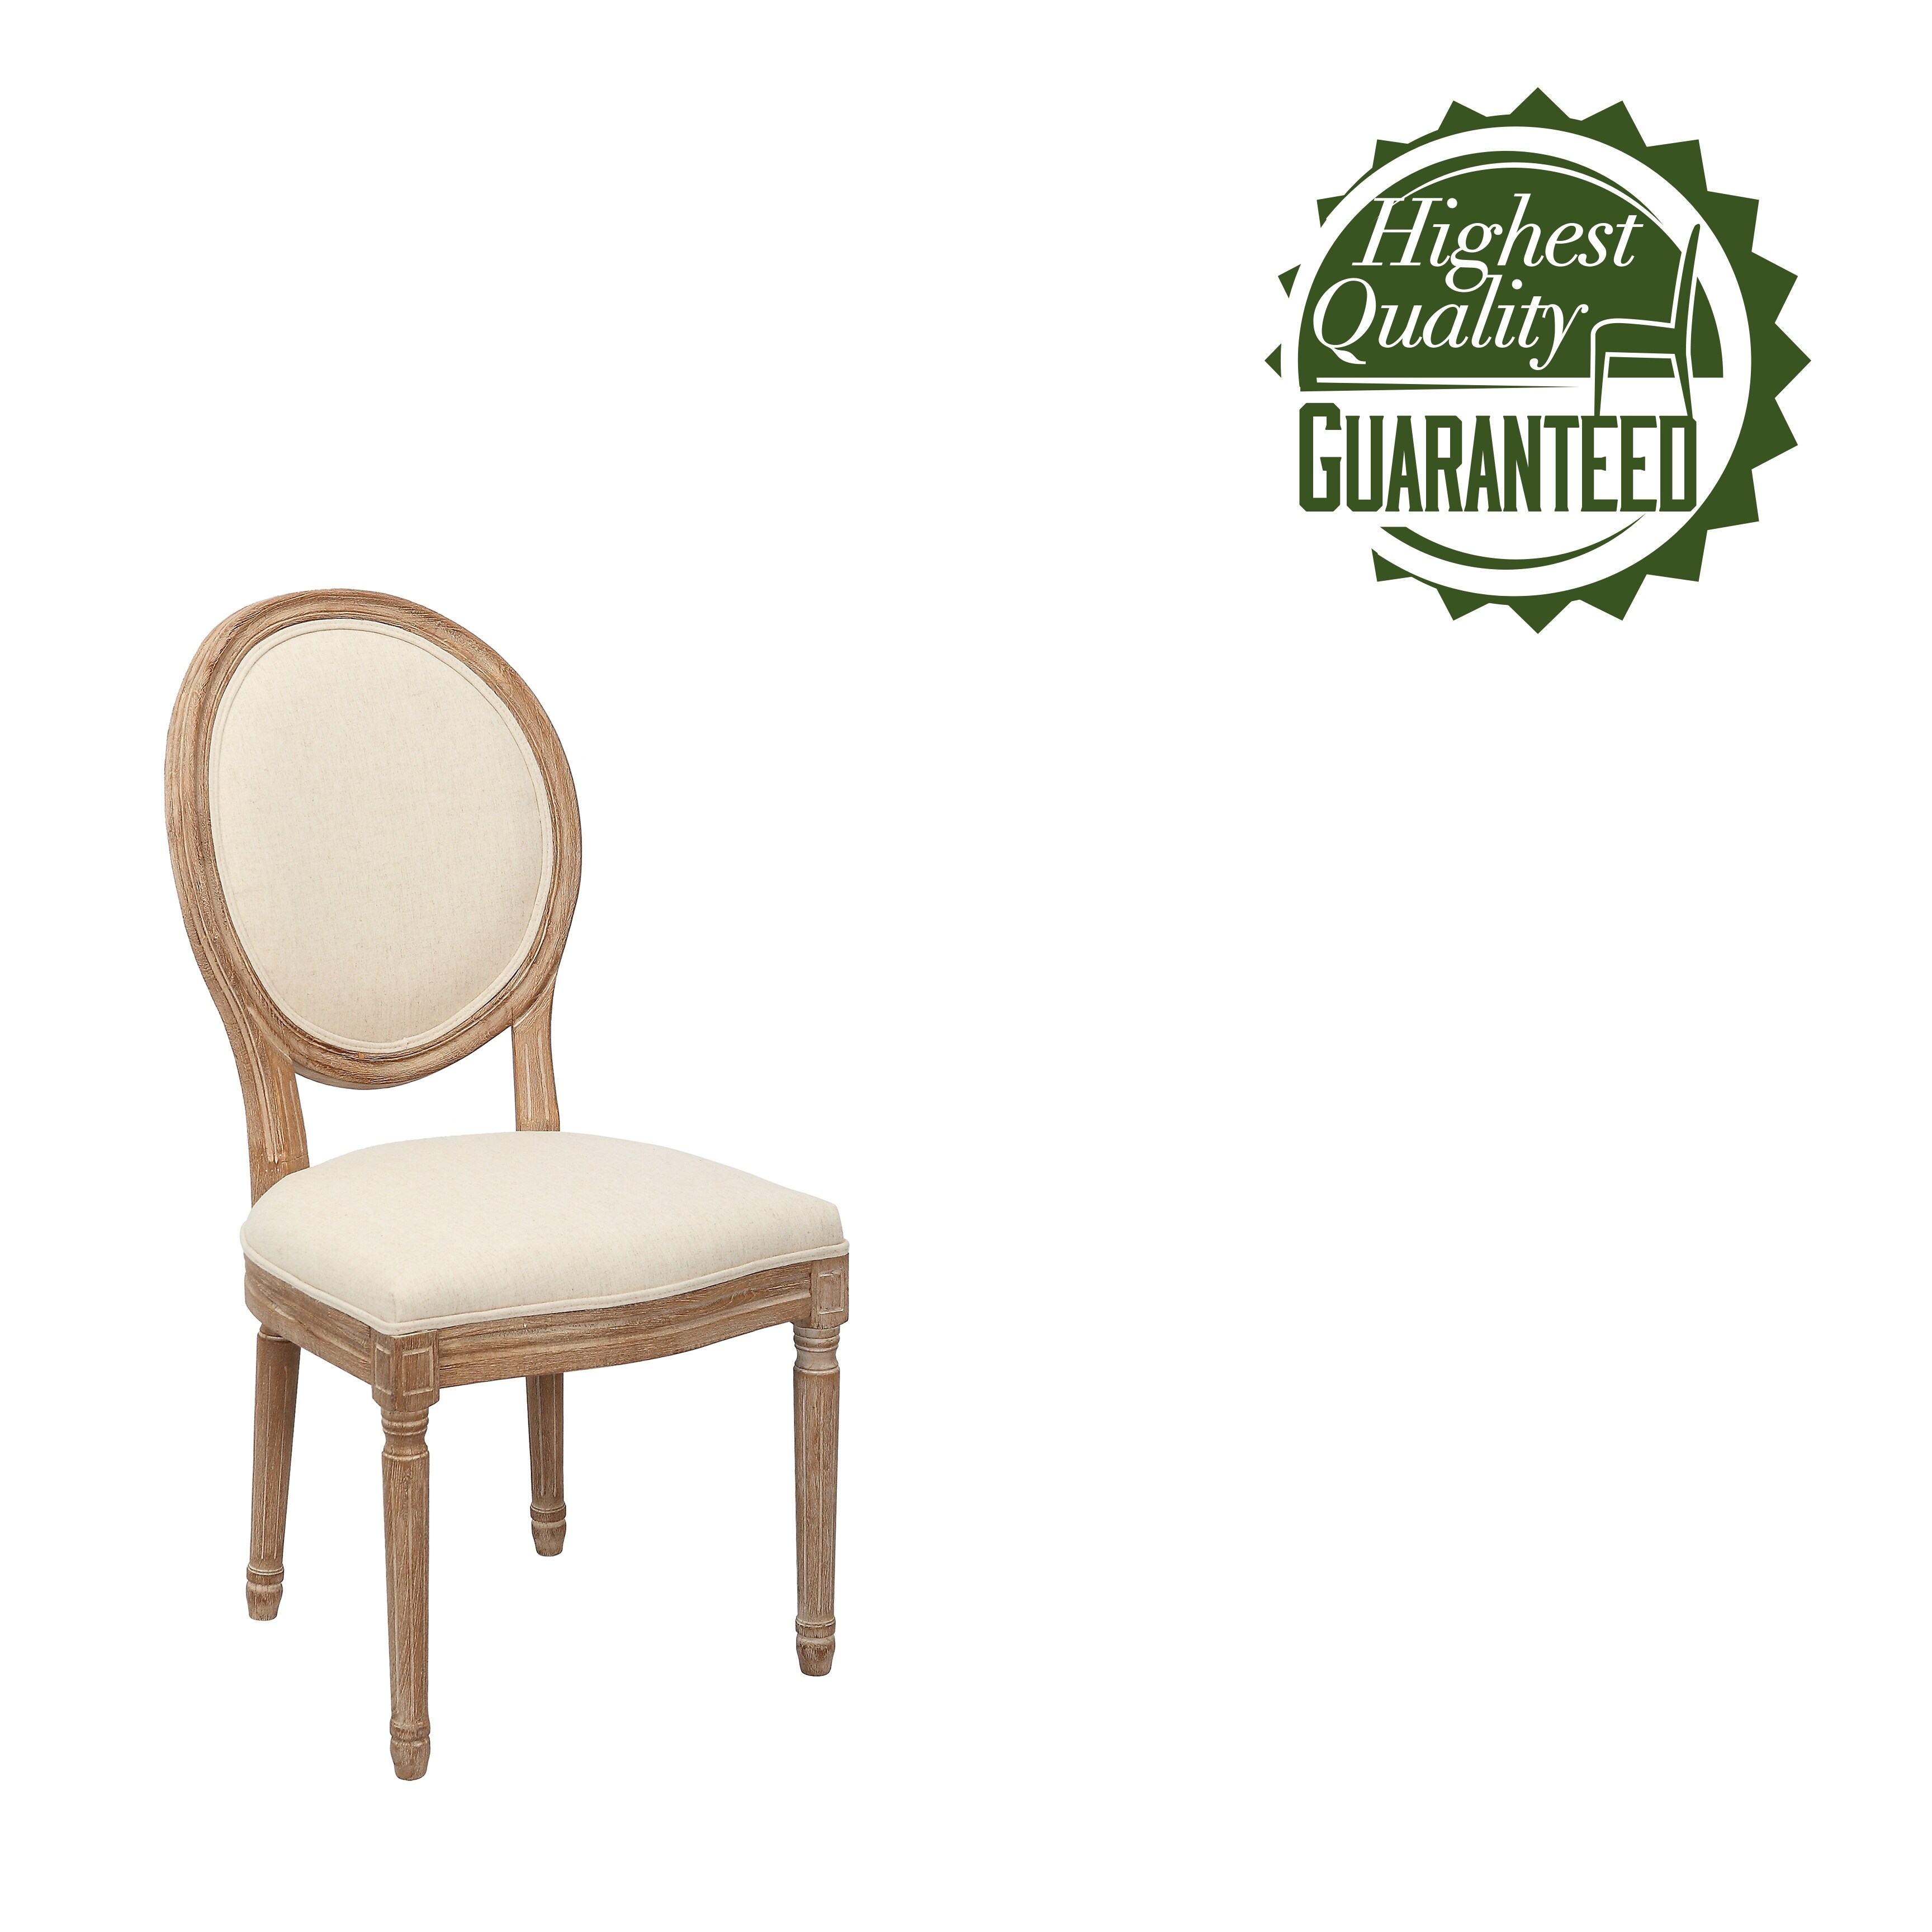 Porthos Home Myles Dining Chairs Set of 2, Circular Back, Linen Upholstery, Elm Wood Frame